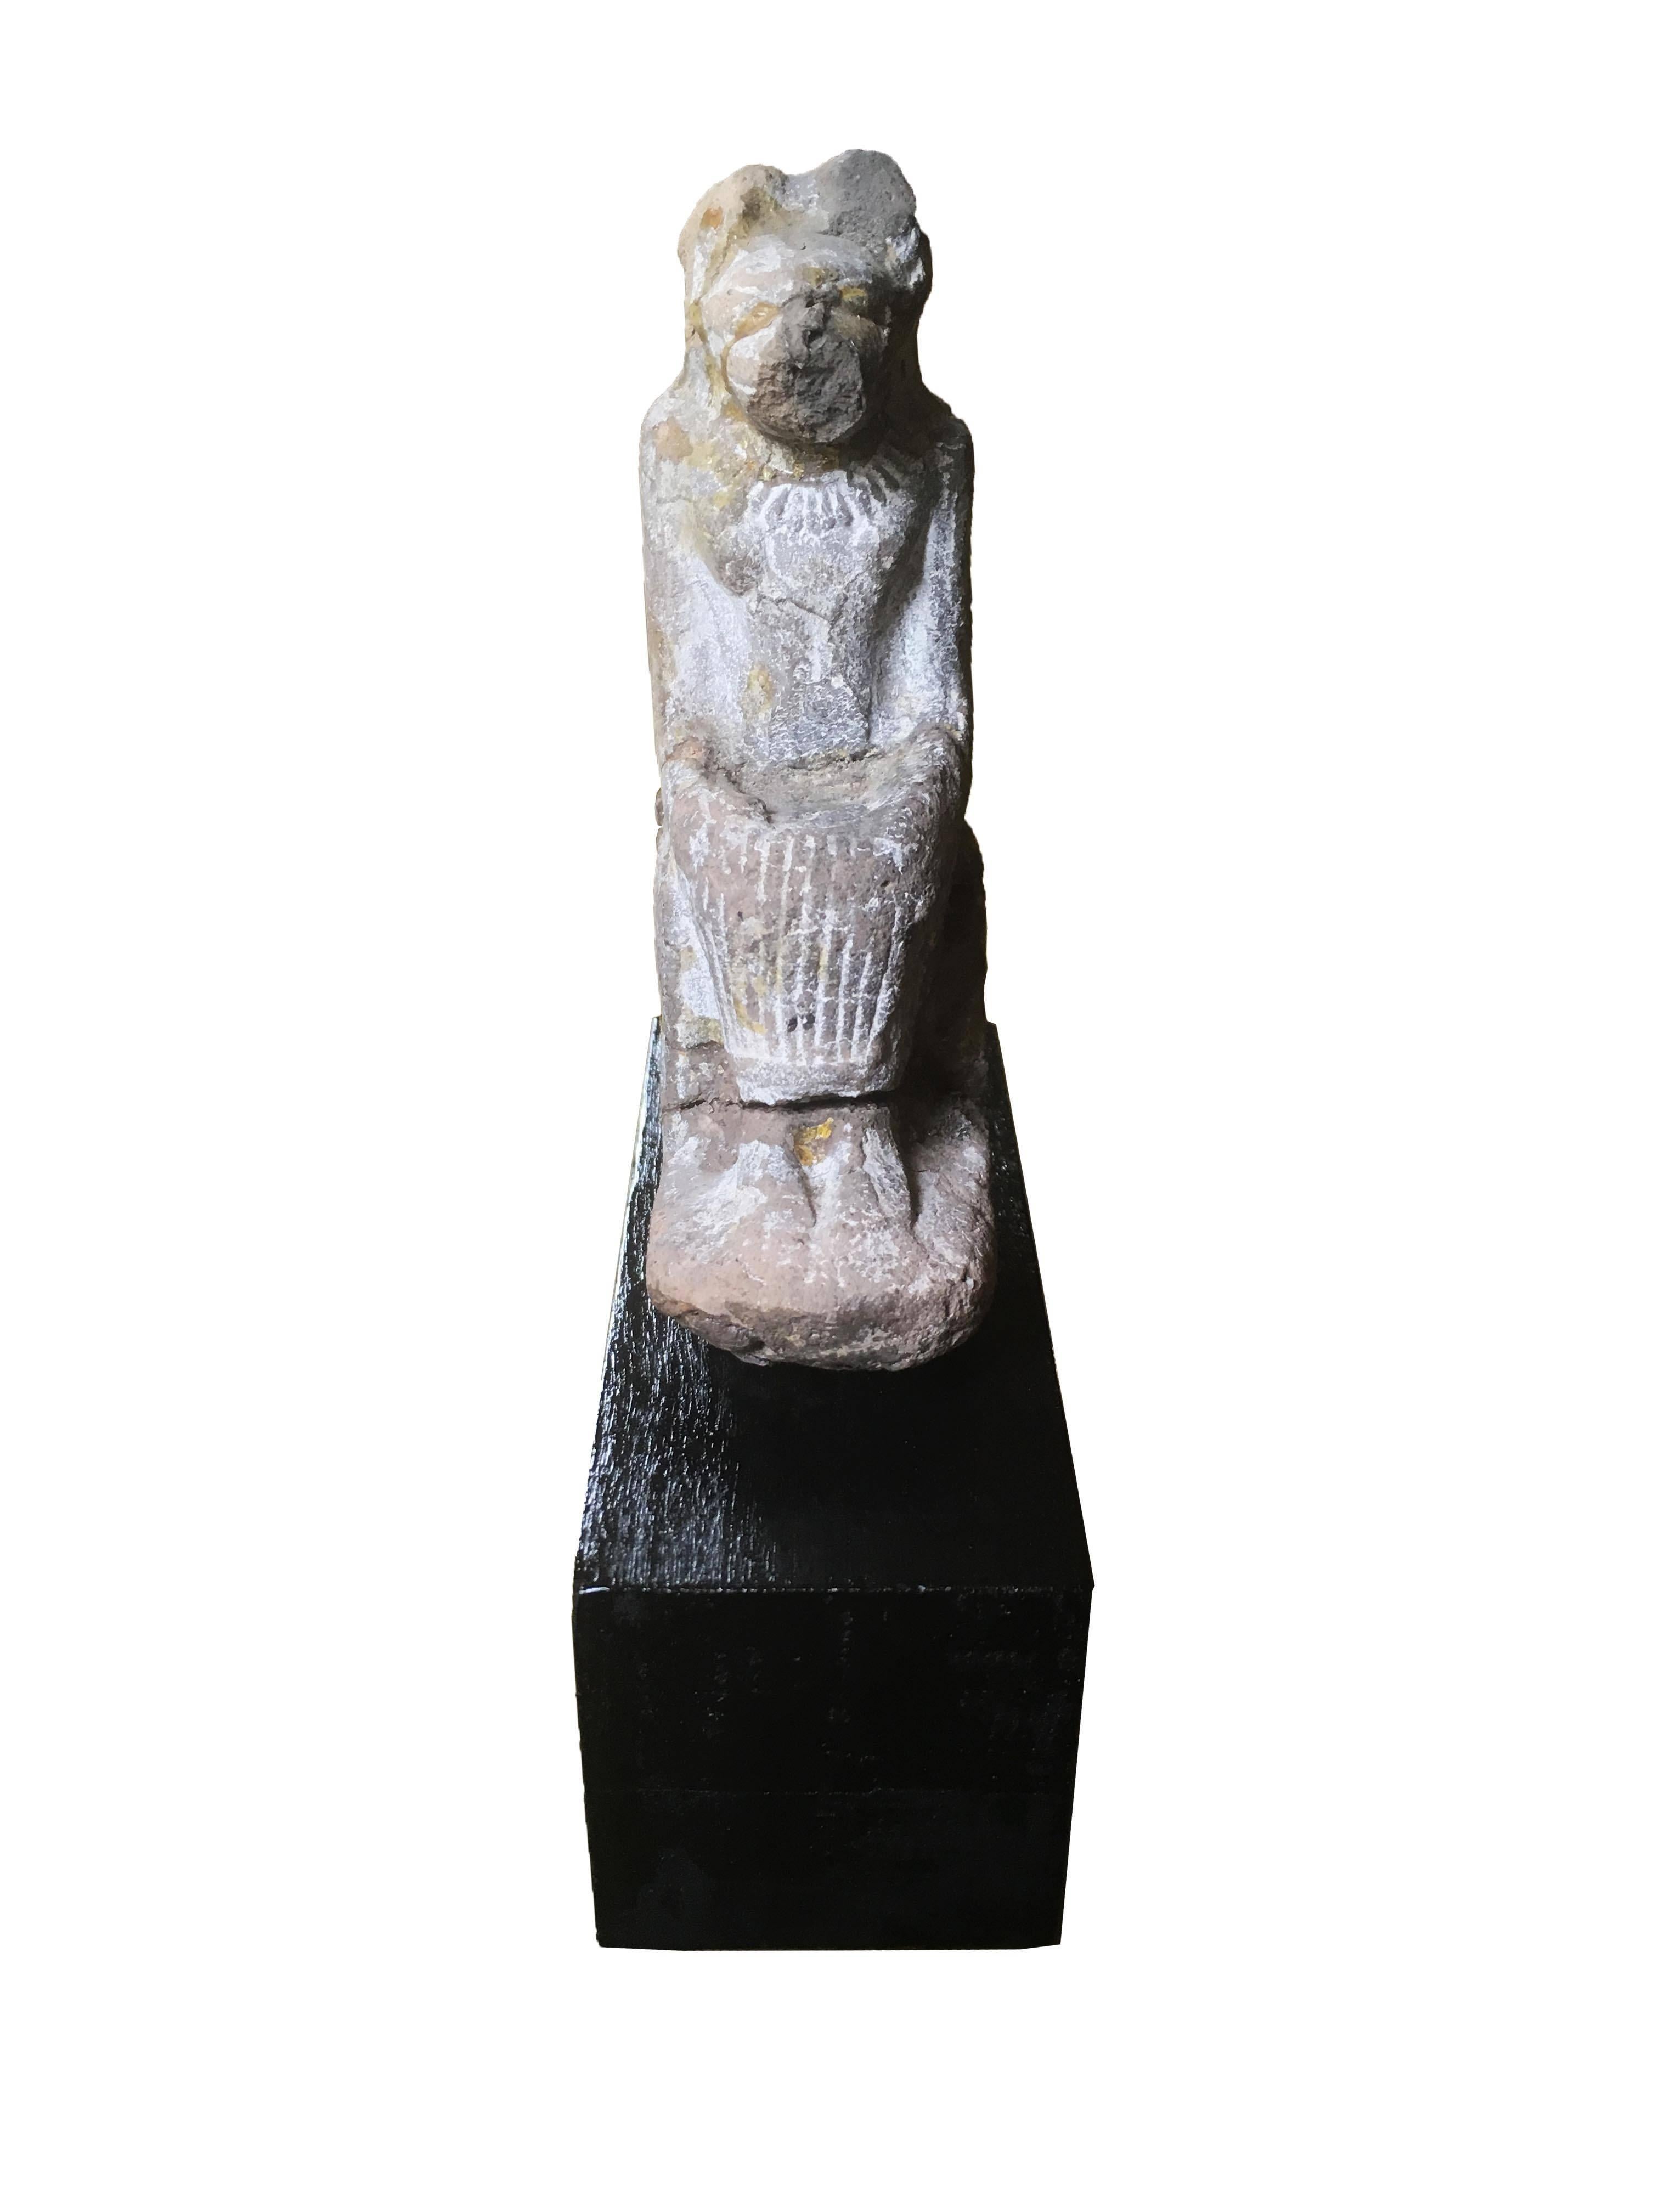 A New Kingdom statue of the female deity Sekhmet, the jealous, quick to anger goddess whose name means "Powerful one." Statues of the goddess were popularly commissioned by Kings and commoners as talismans against bad fortune. The clay